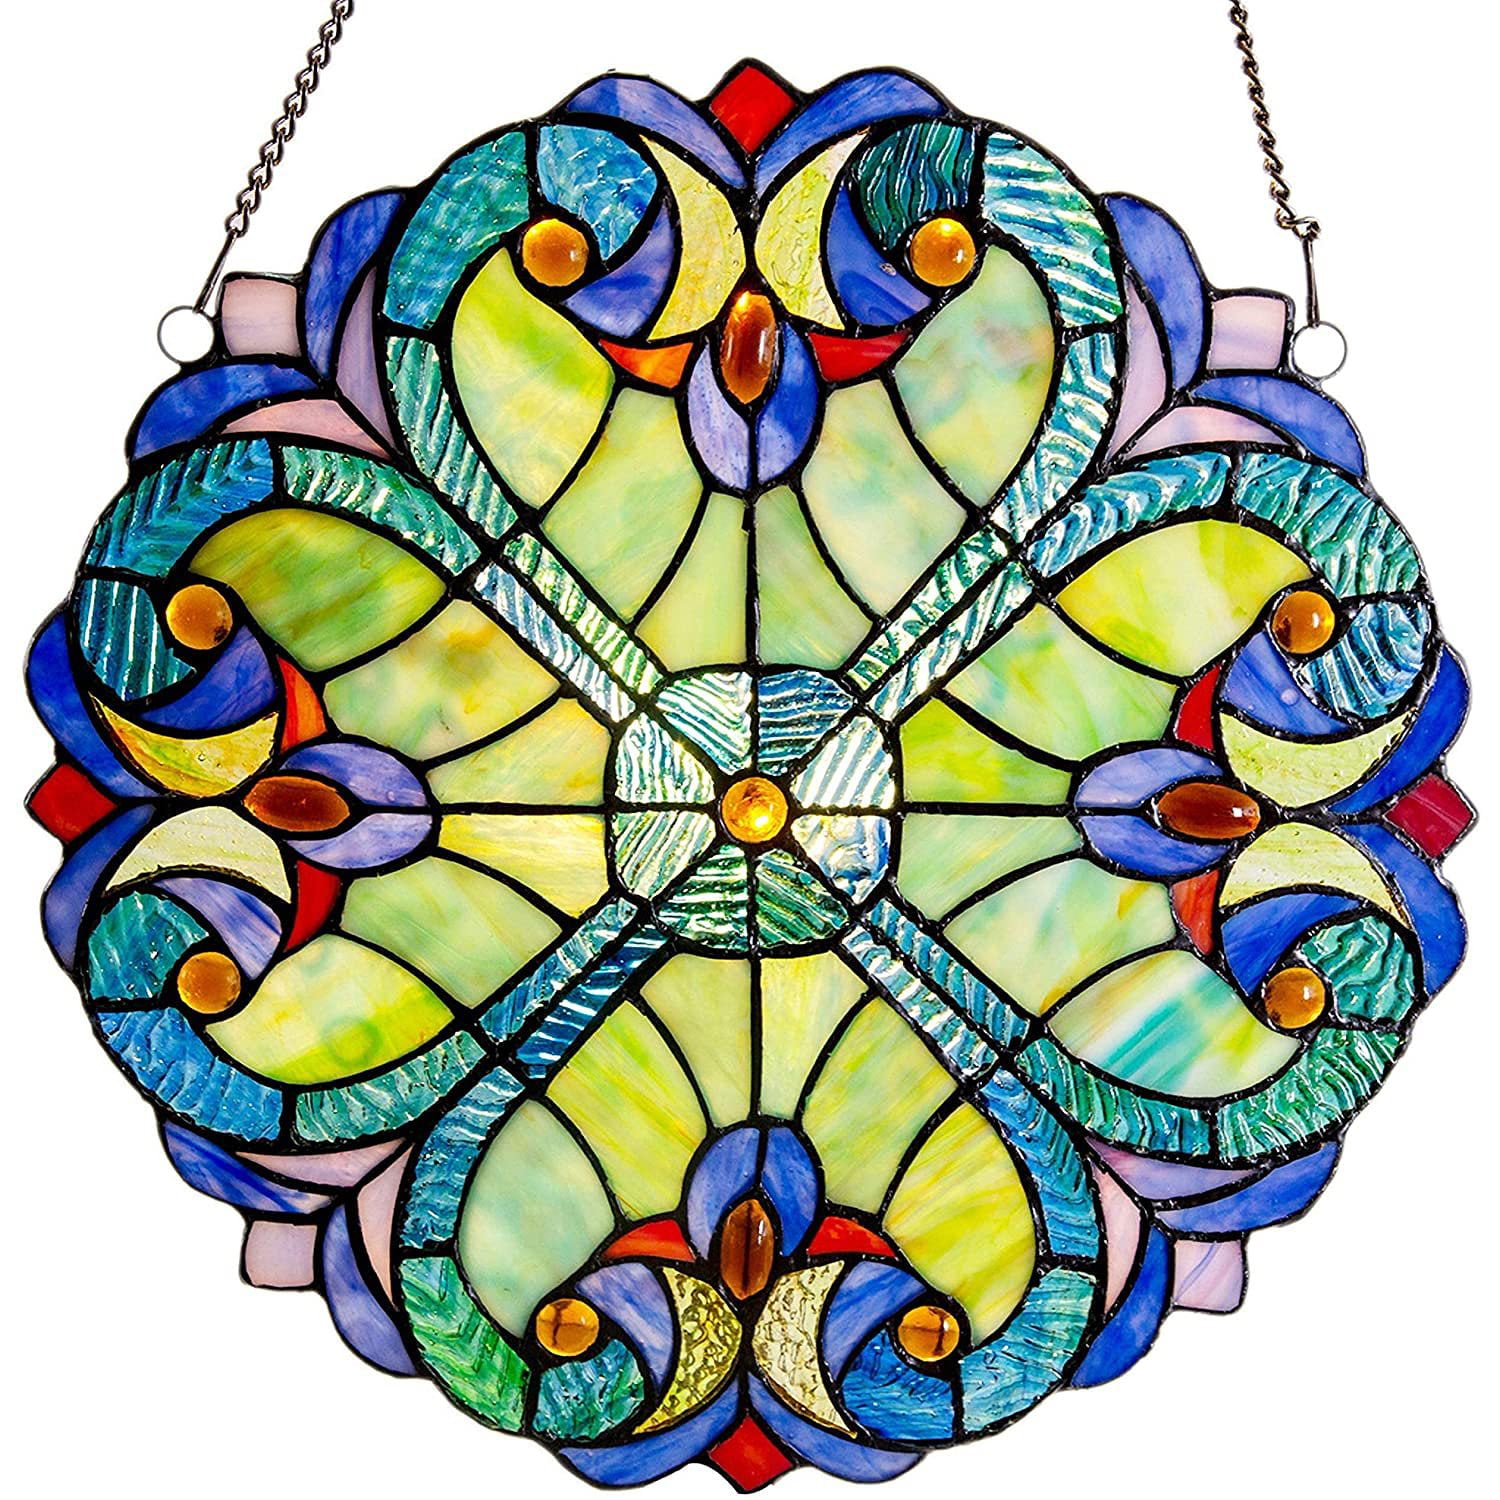 10inch Vintage Style Colorful Stained Glass Window Panel Suncatcher Garden US 